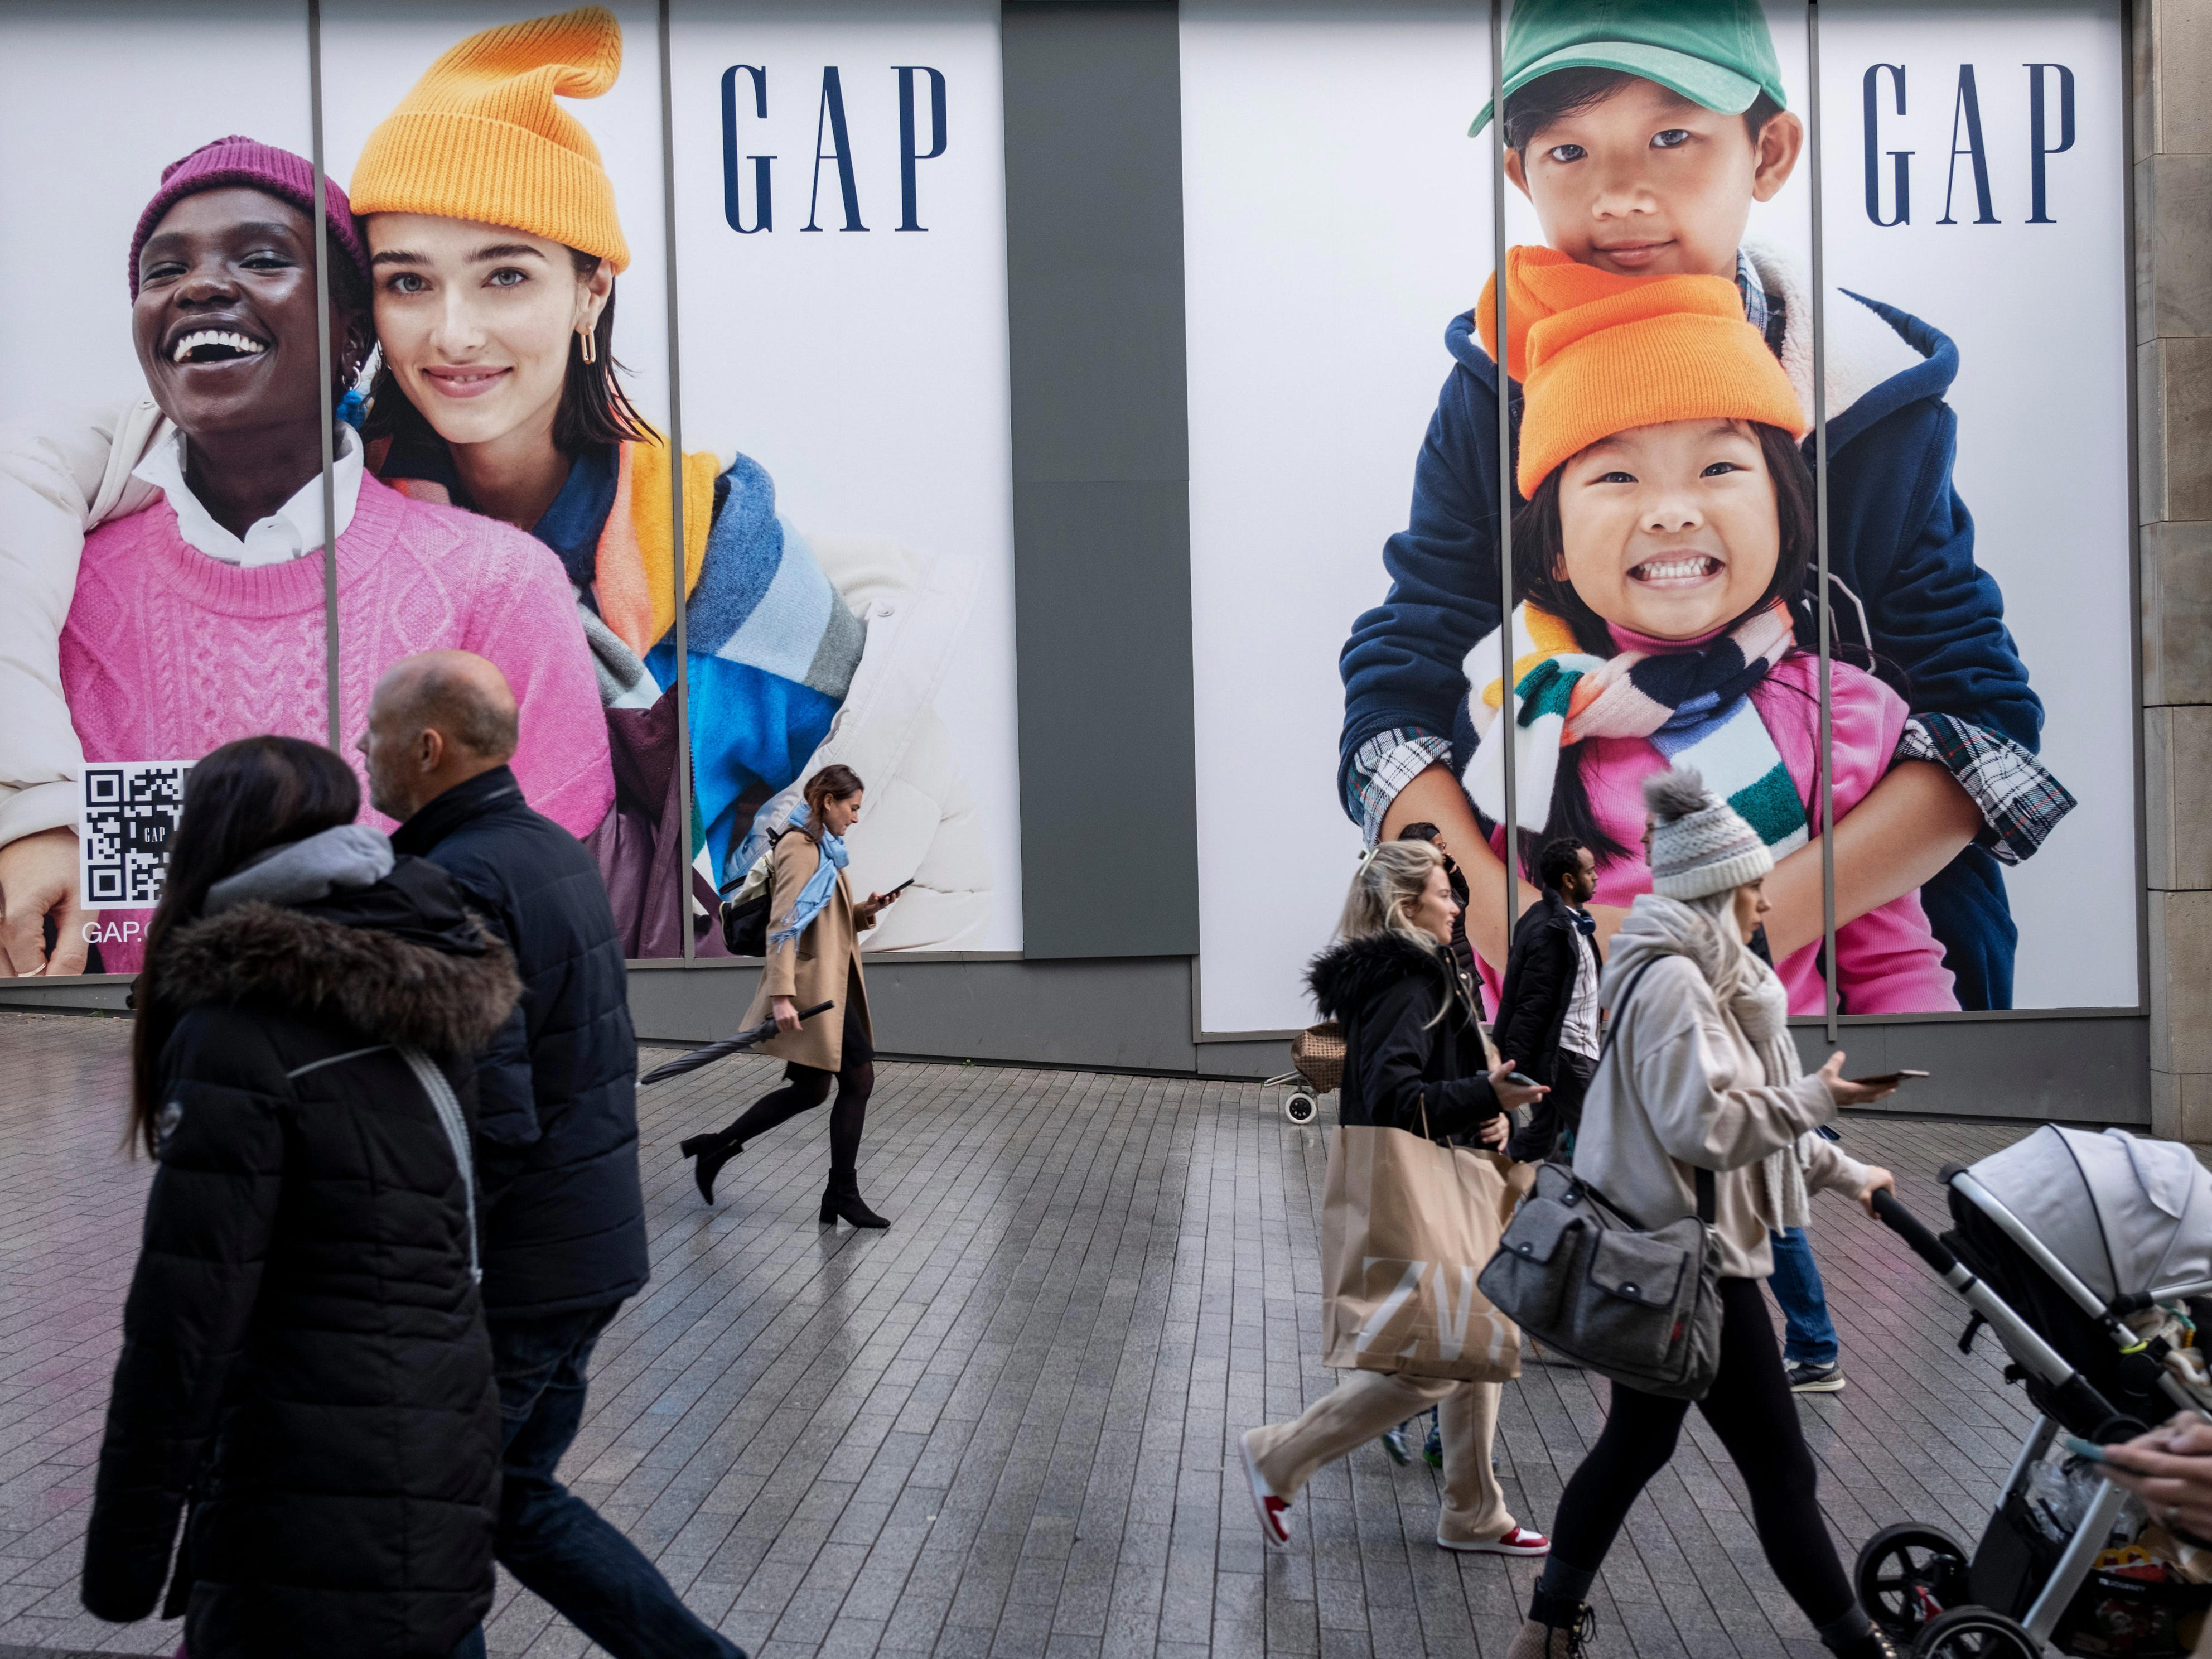 <p>Clothing retailer Gap is cutting hundreds of jobs in an attempt to become more "nimble and less bureaucratic," The Wall Street Journal <a href="https://www.wsj.com/articles/gap-plans-to-lay-off-hundreds-of-corporate-workers-in-new-round-of-cuts-6d22ce7" rel="noopener">reported</a> Tuesday, citing people familiar with the situation. </p><p>"Our goal is to flatten the organization, increase spans of control to create more robust roles and individual empowerment, and decrease layers to remove bottlenecks and make better, faster decisions," the company's chairman and interim CEO Bob Martin said in a memo to employees last week, <a href="https://www.wsj.com/articles/gap-plans-to-lay-off-hundreds-of-corporate-workers-in-new-round-of-cuts-6d22ce7" rel="noopener">according</a> to the Journal. </p><p>The current round of cuts is expected to be larger than the 500 jobs Gap slashed from its corporate ranks last September, per the Journal.  </p>